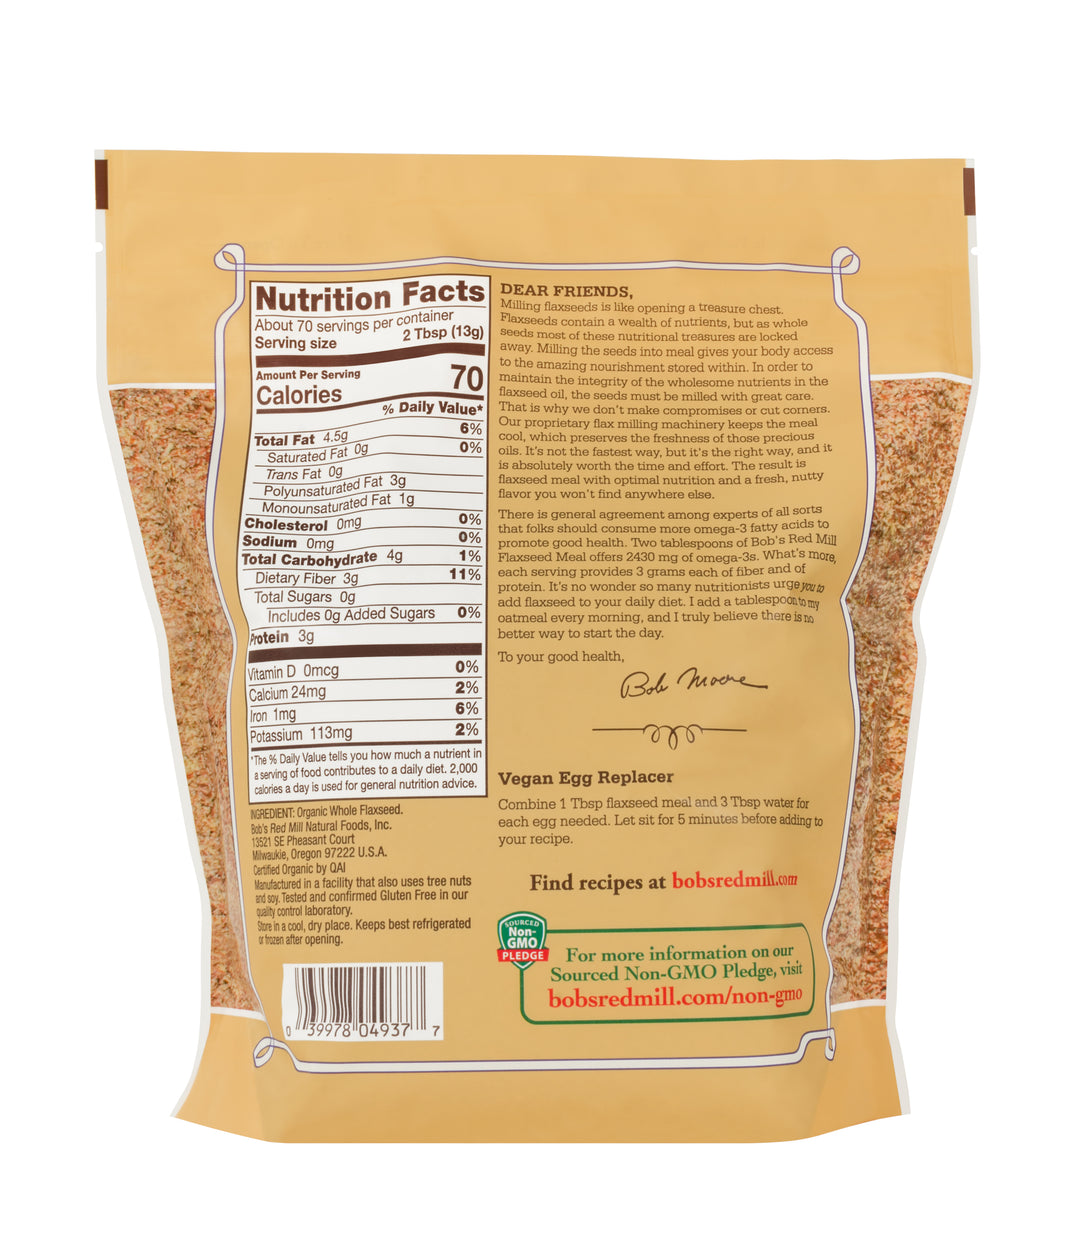 Bob's Red Mill Natural Foods Inc Organic Brown Flaxseed Meal-32 oz.-4/Case